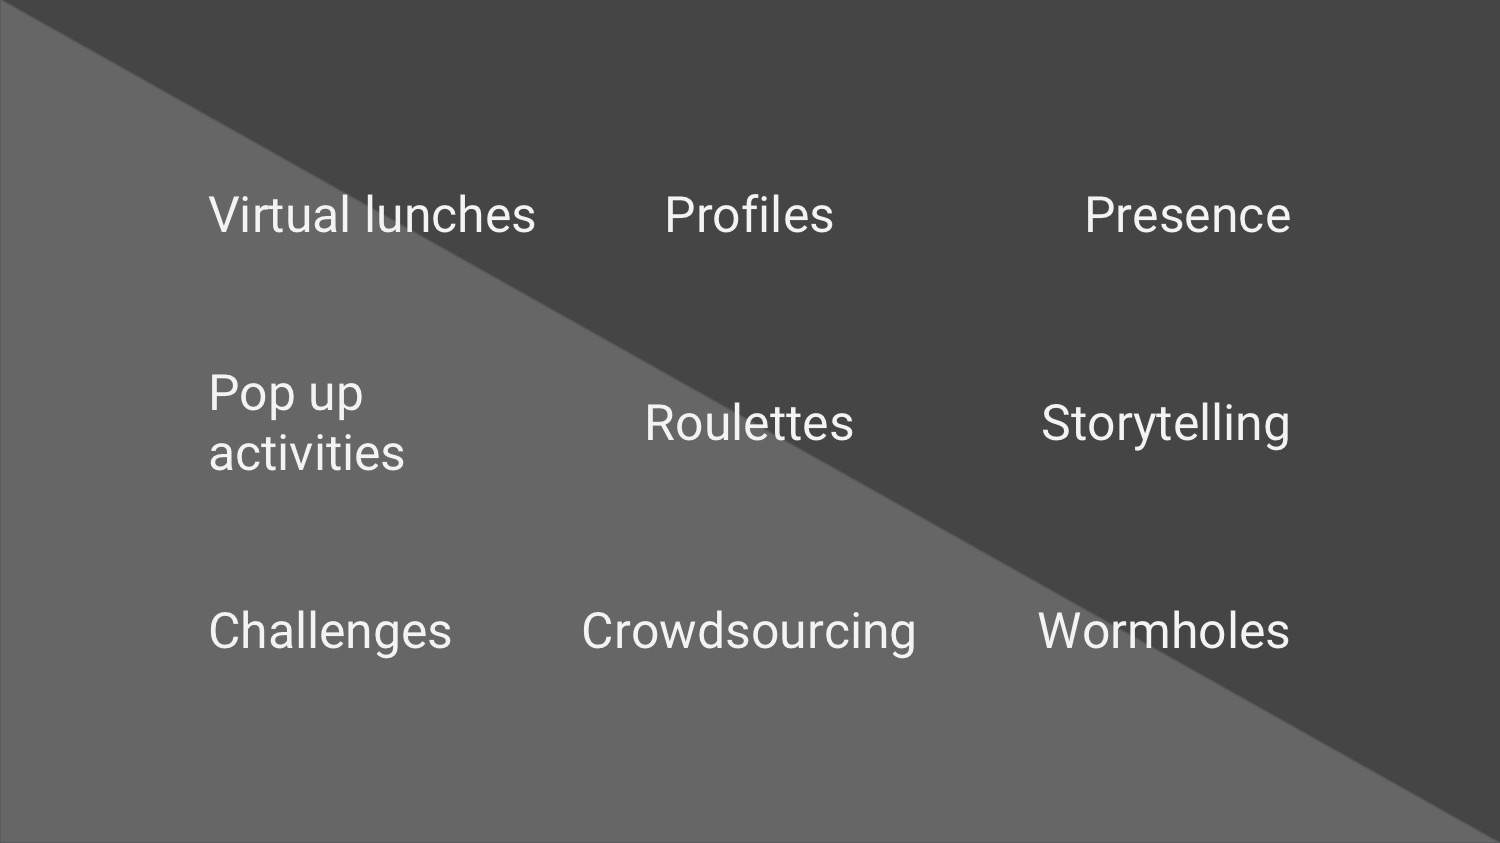 Digital placemaking for the workplace events and activities include: Virtual lunches, Profiles, Presence, Pop up activities, Roulettes, Storytelling, Challenges, Crowdsourcing, and Wormholes